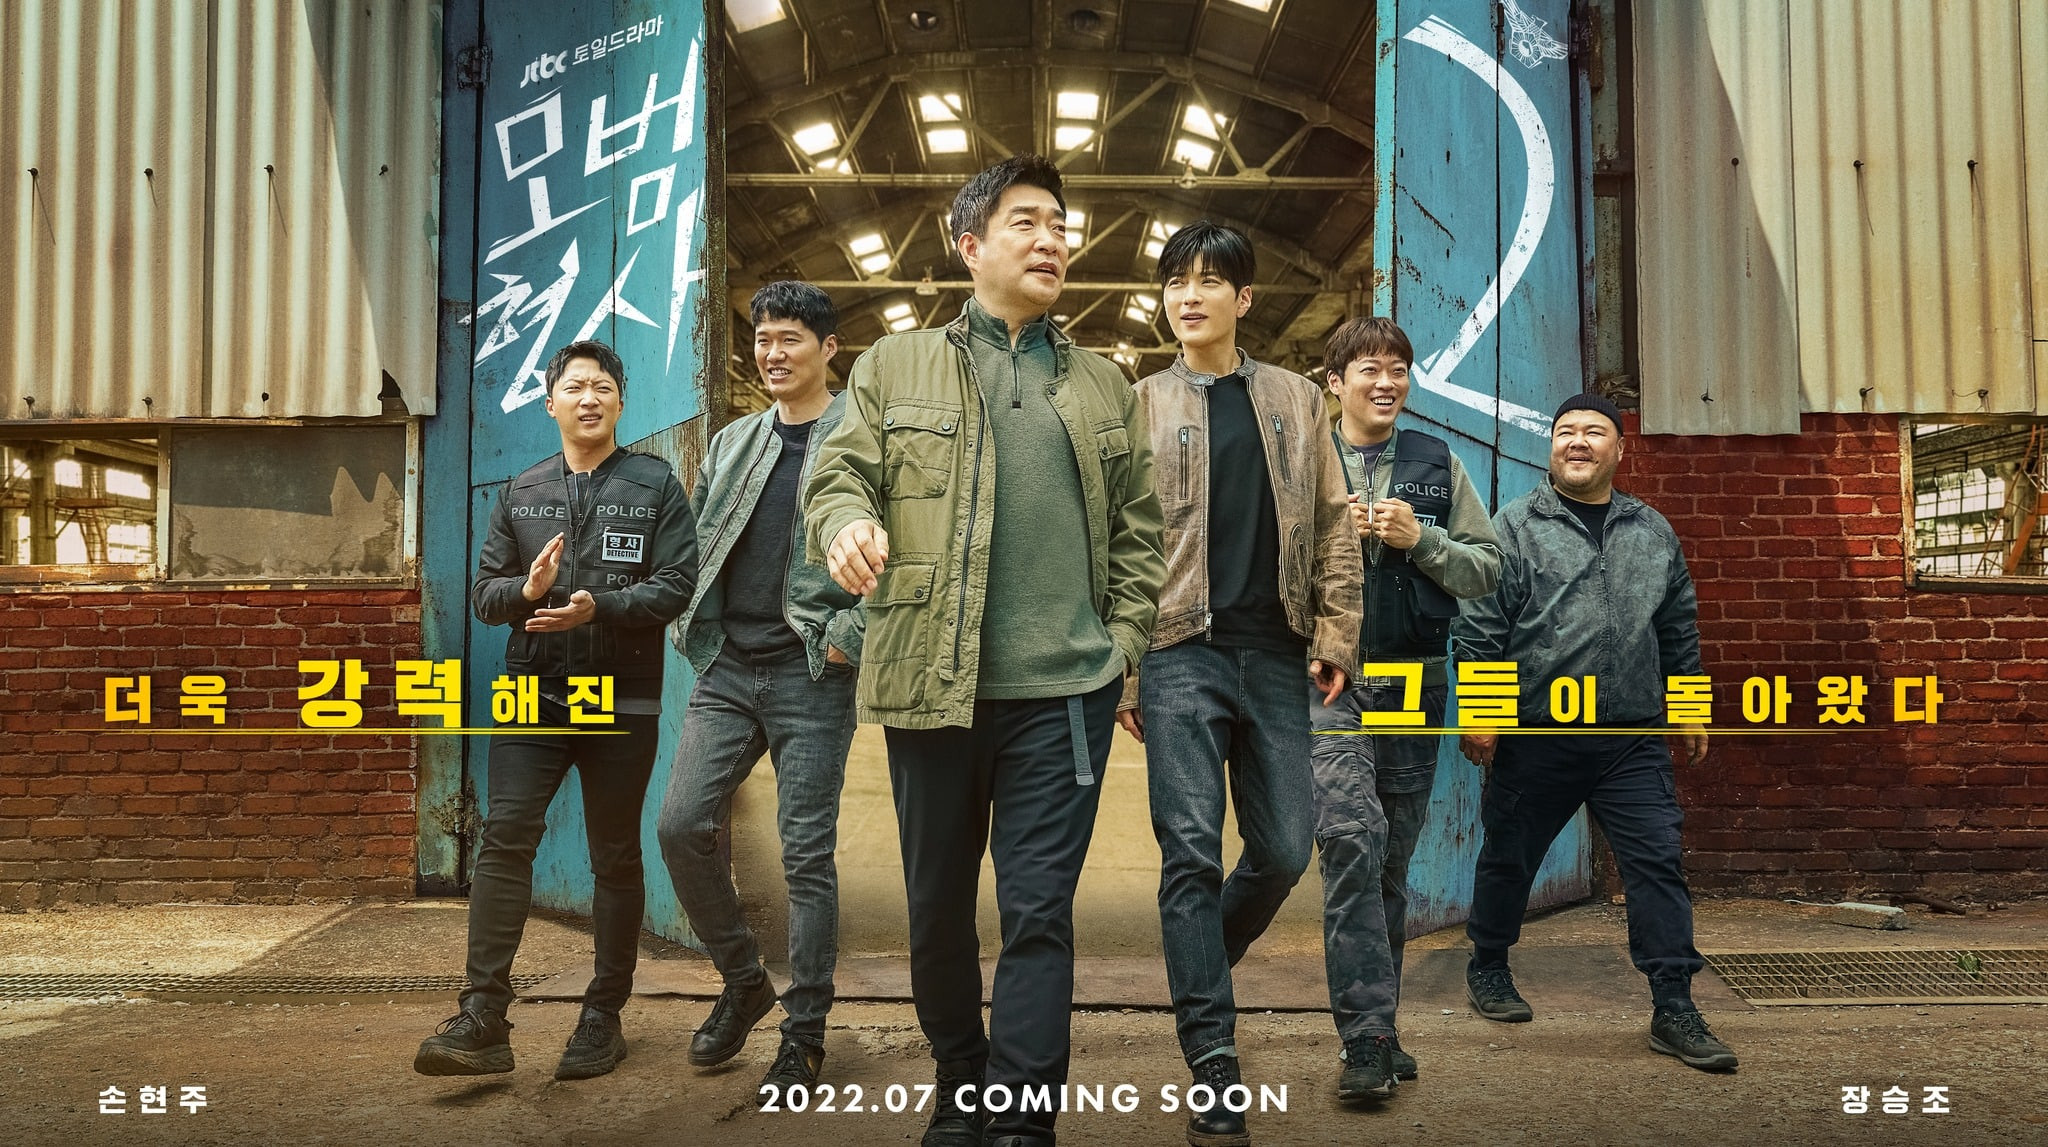 Son Hyun Joo, Jang Seung Jo, And More Are Back And Better In Season 2  Poster For “The Good Detective” | Soompi